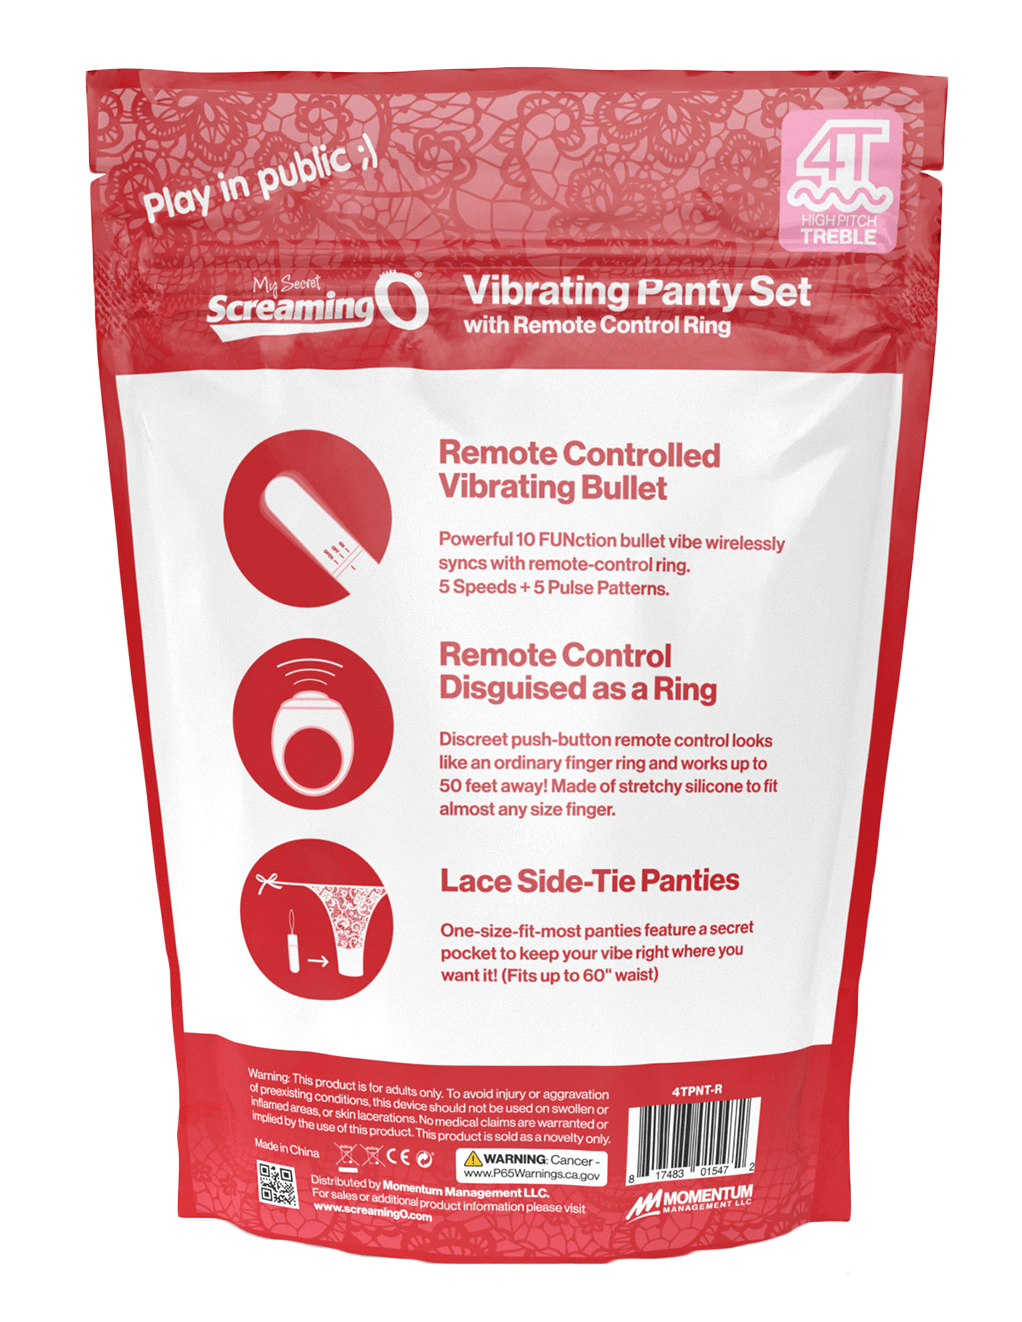 Screaming O 4T Vibrating Panty - Back of Packaging